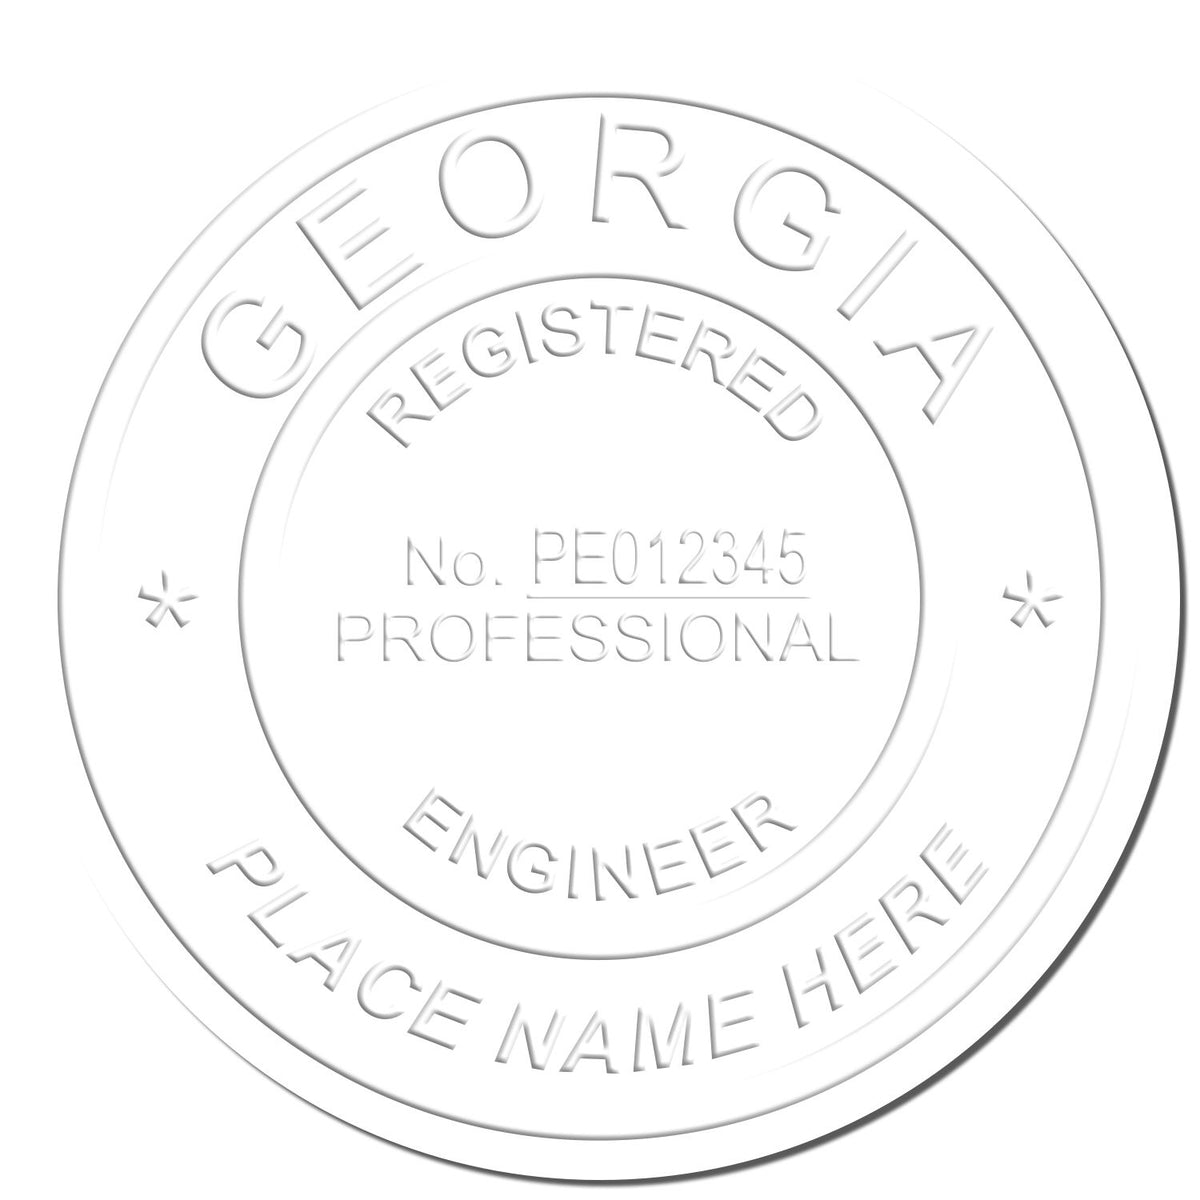 This paper is stamped with a sample imprint of the Heavy Duty Cast Iron Georgia Engineer Seal Embosser, signifying its quality and reliability.